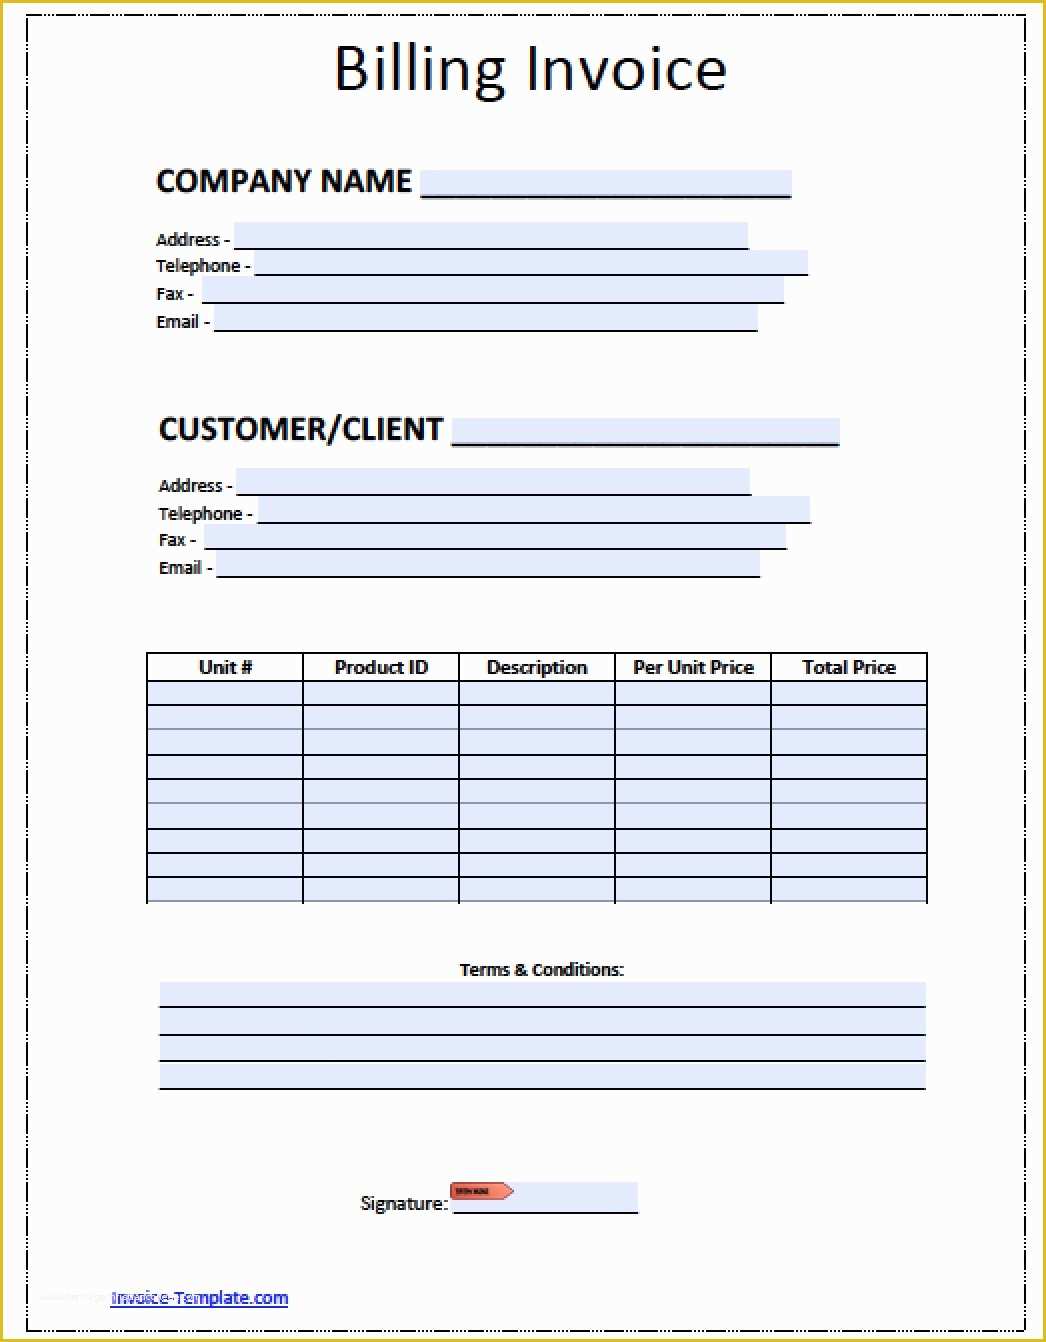 Free Billing Template Of Free Billing Invoice Template Excel Pdf